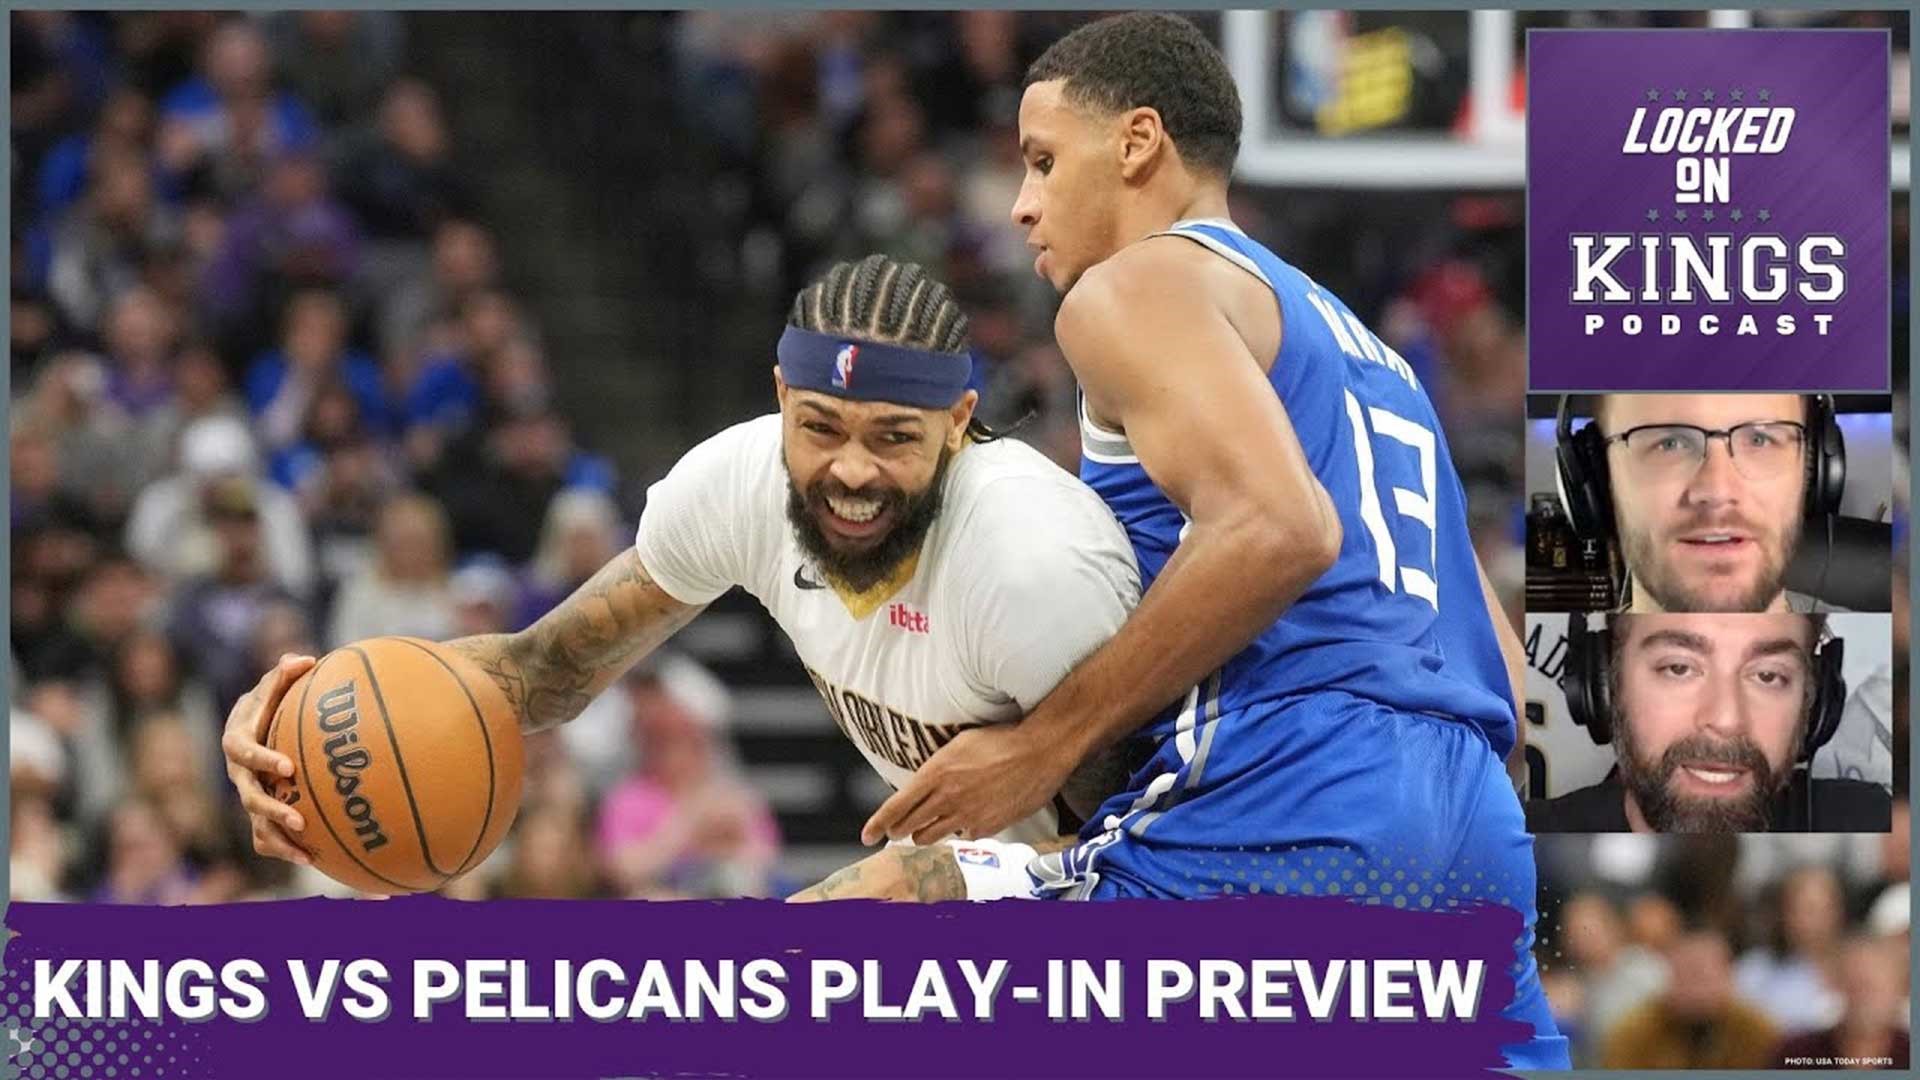 Matt George from Locked On Kings & Jake Madison from Locked On Pelicans come together for an in-depth preview of the Sacramento Kings vs New Orleans Pelicans game.